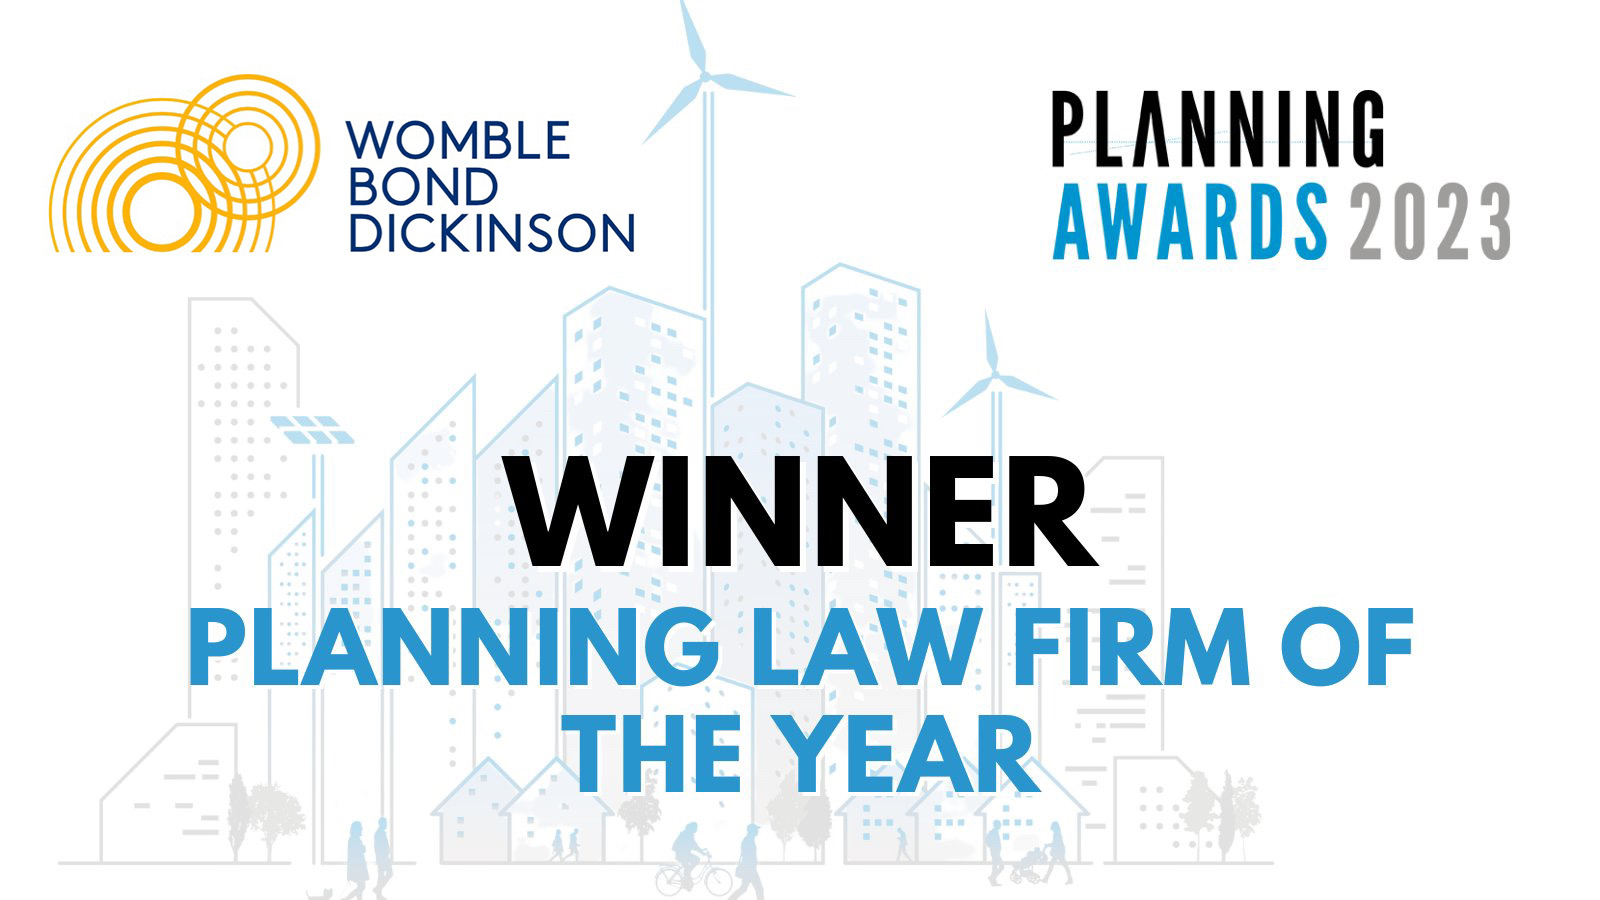 Winner - Planning Law Firm of the Year